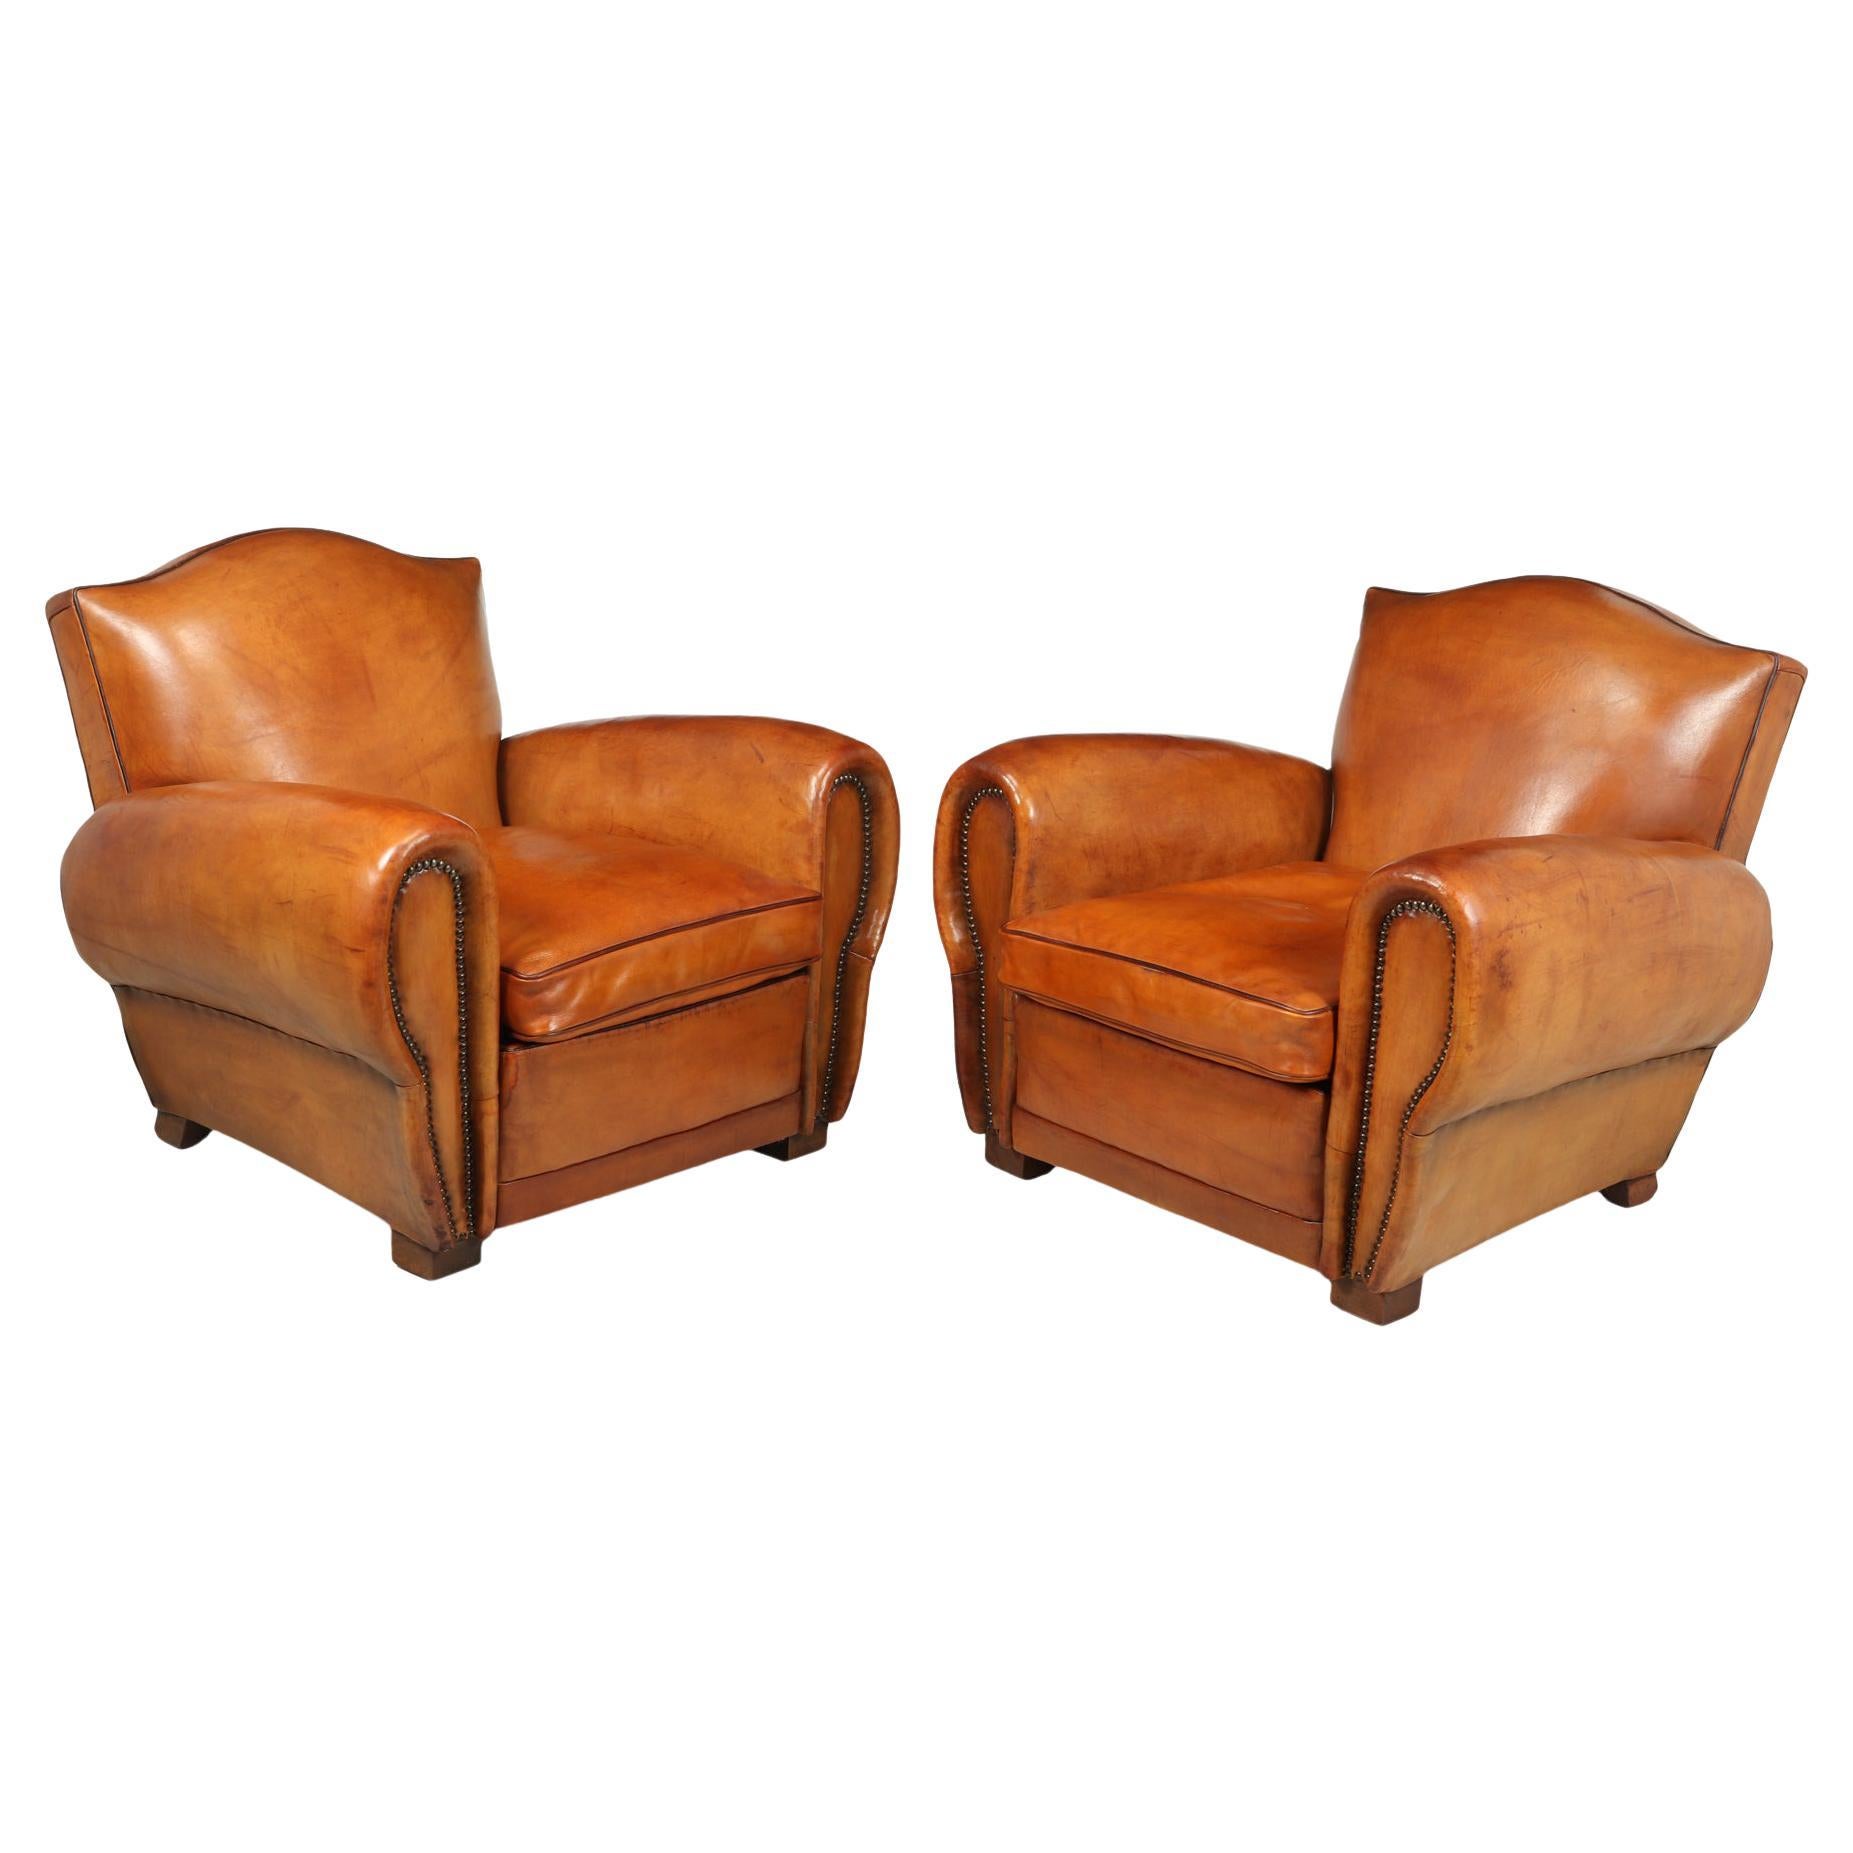 Pair of French Leather Club Armchairs, 1940